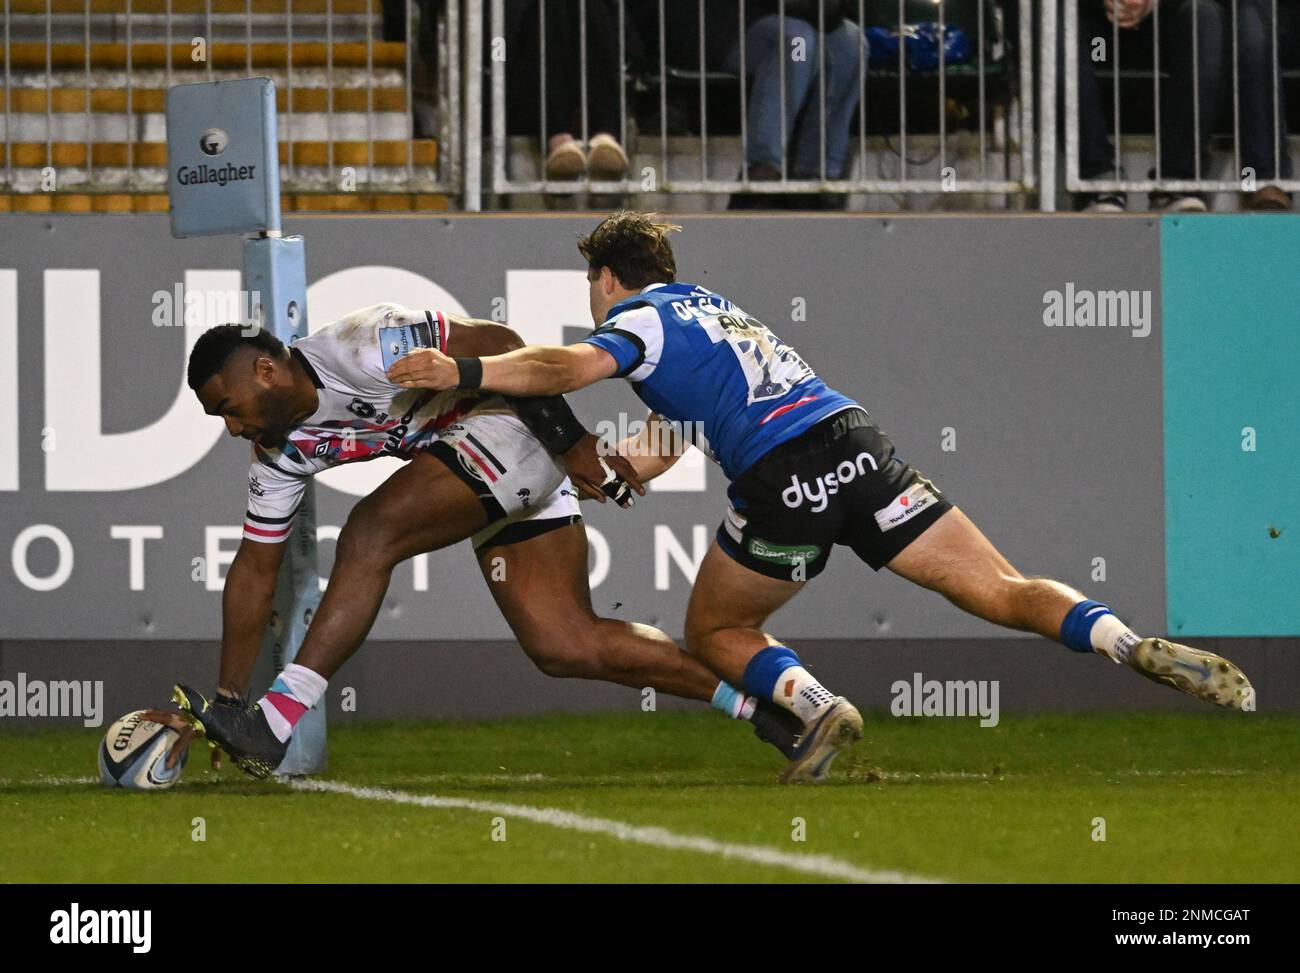 24th February 2023,  The Recreation Ground, Bath, Somerset, England; Gallagher Premiership Rugby, Bath versus Bristol Bears; Siva Naulago of Bristol Bears scores a try in the corner under pressure from Tom de Glanville of Bath Stock Photo